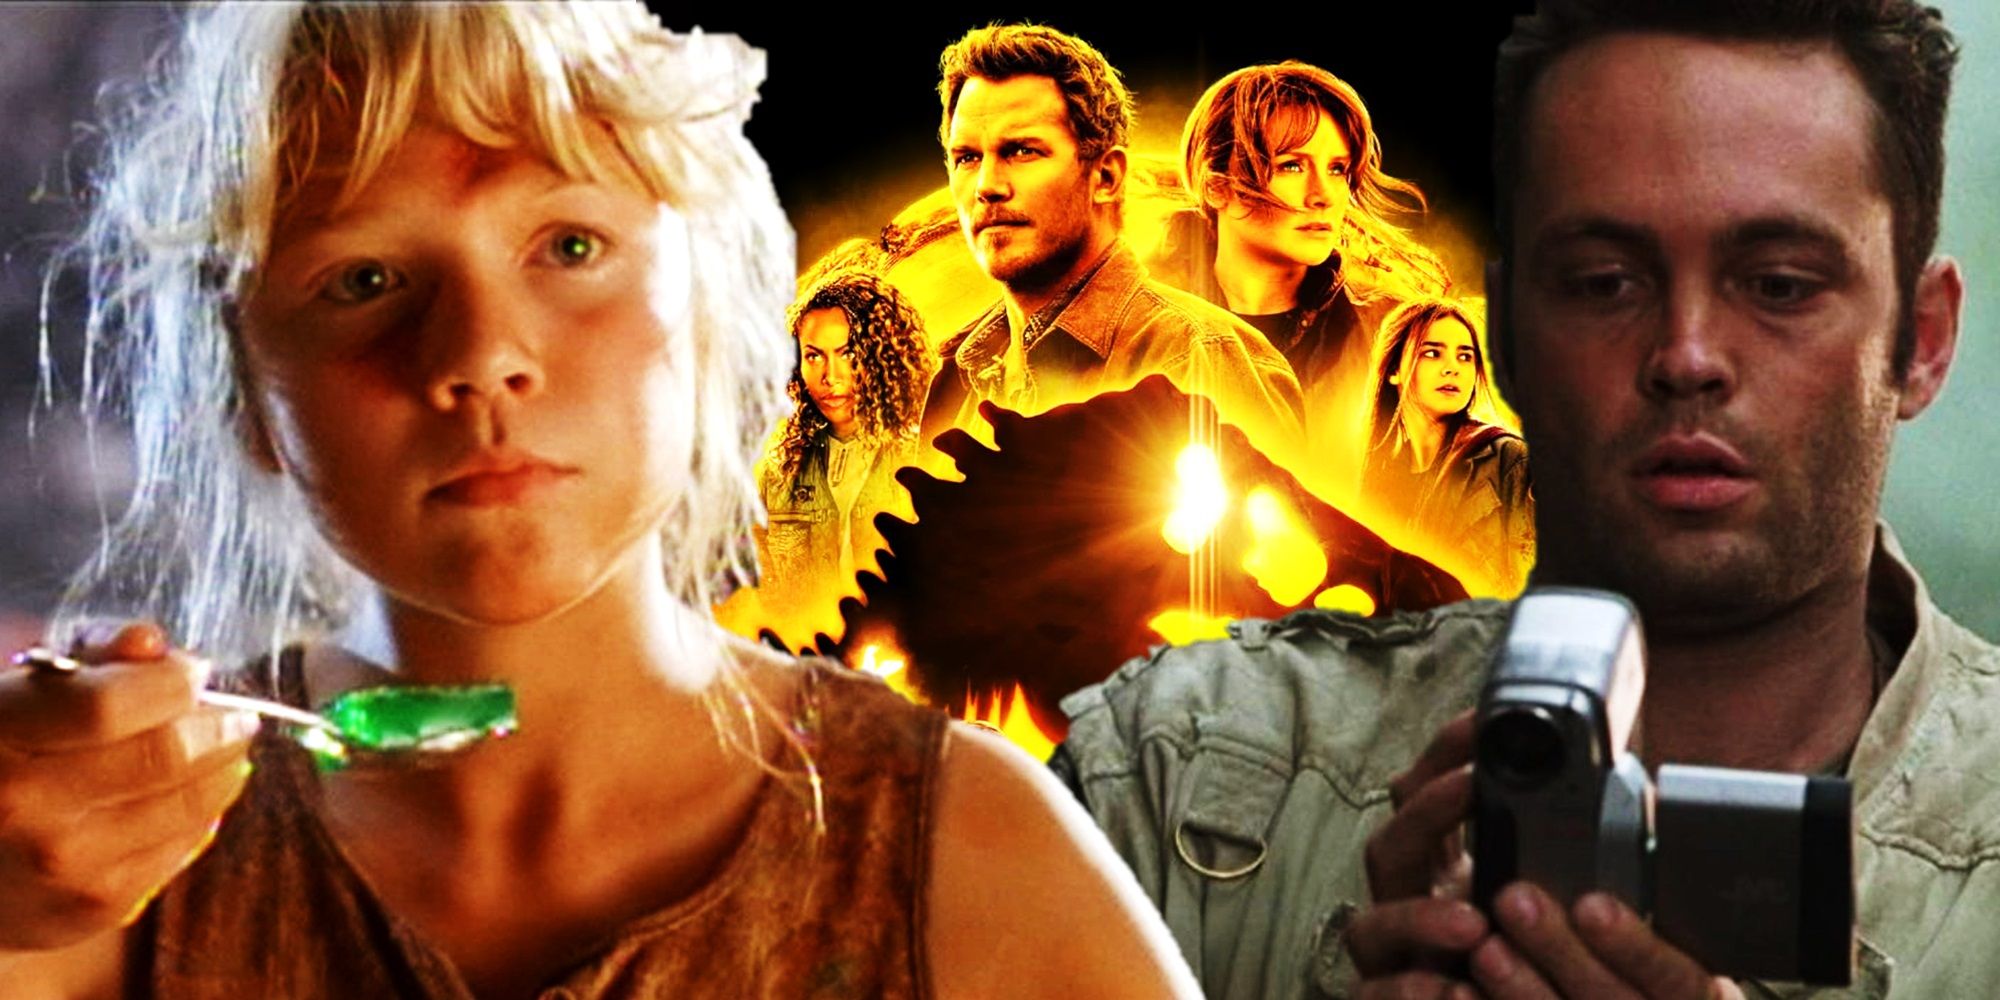 Collage of Lex in Jurassic Park, Nick in The Lost World Jurassic Park, and the poster for Jurassic World Dominion